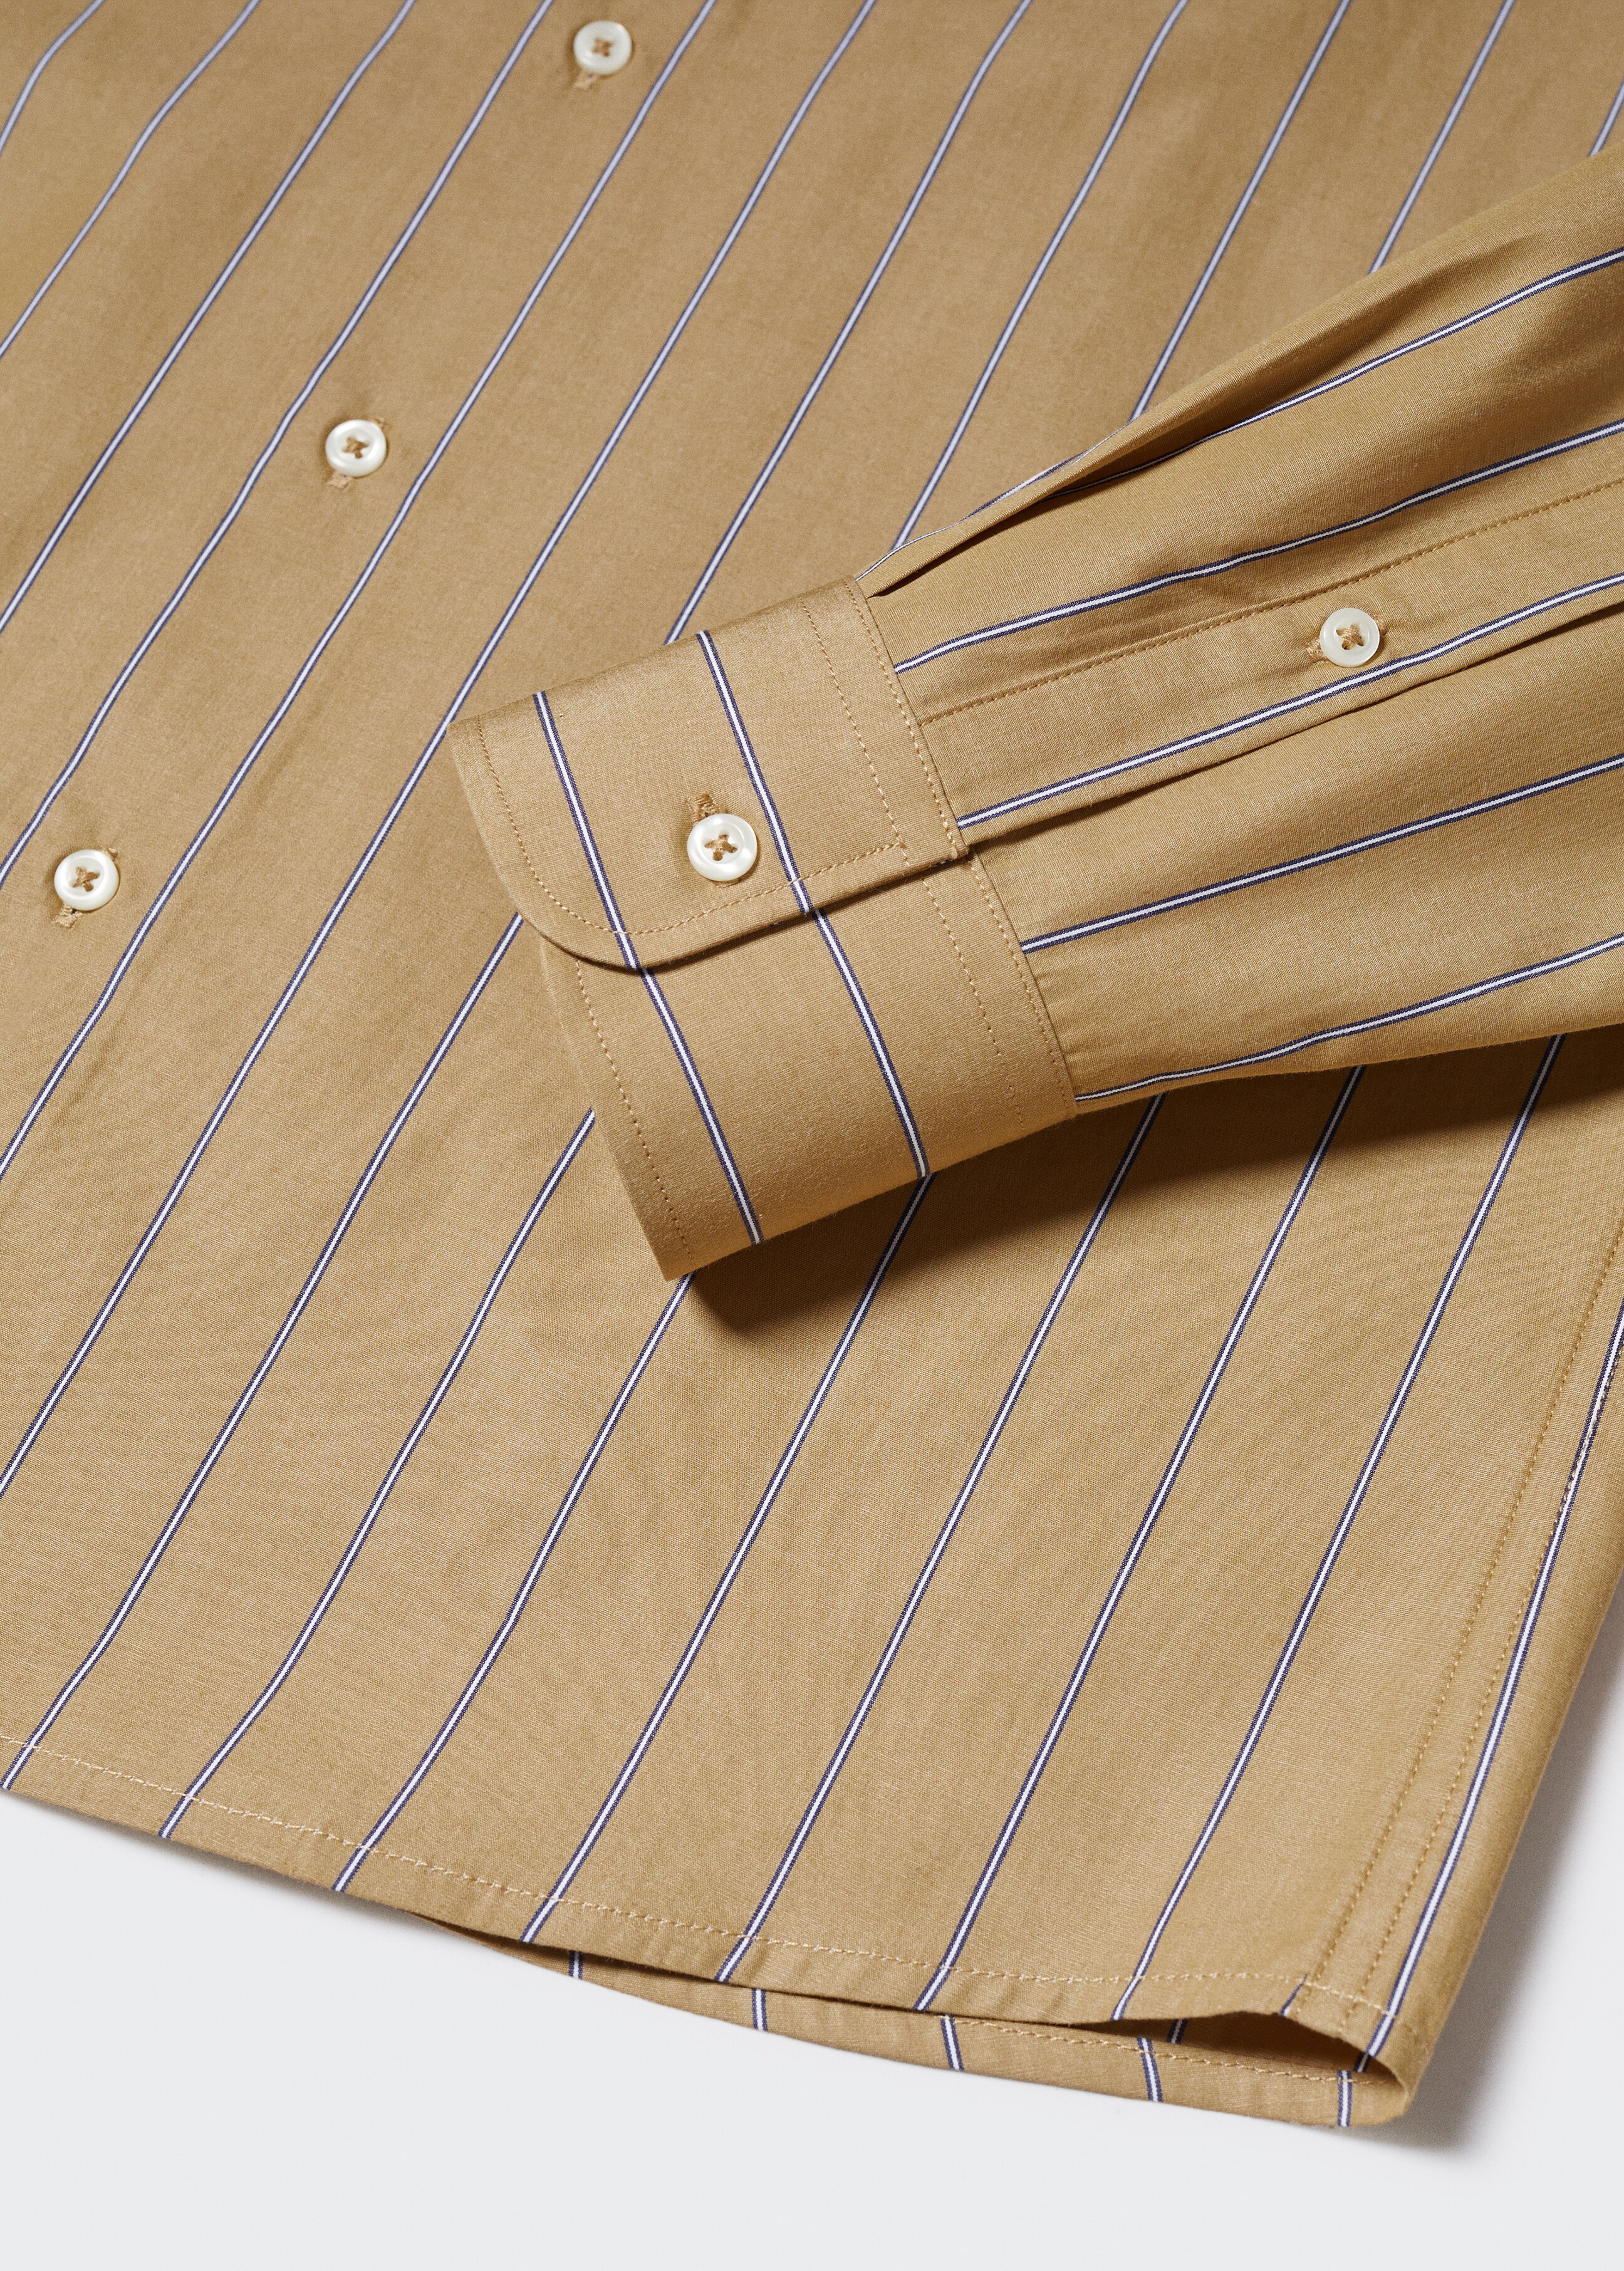 Striped cotton shirt - Details of the article 8